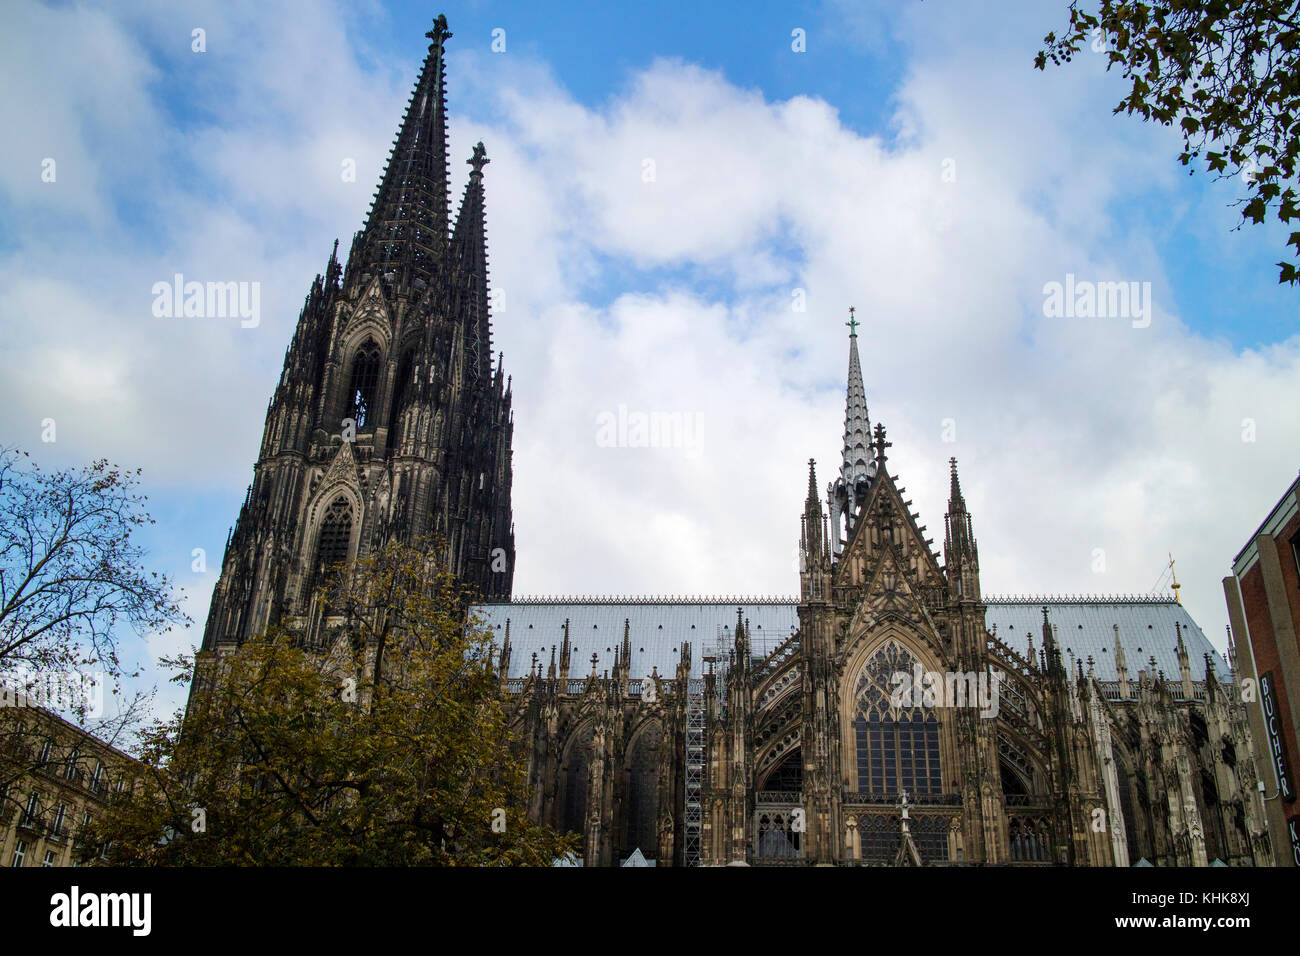 Cologne Cathedral, Innenstadt central city district and largest city in the German federal State of North Rhine-Westphalia in Germany, Europe Stock Photo